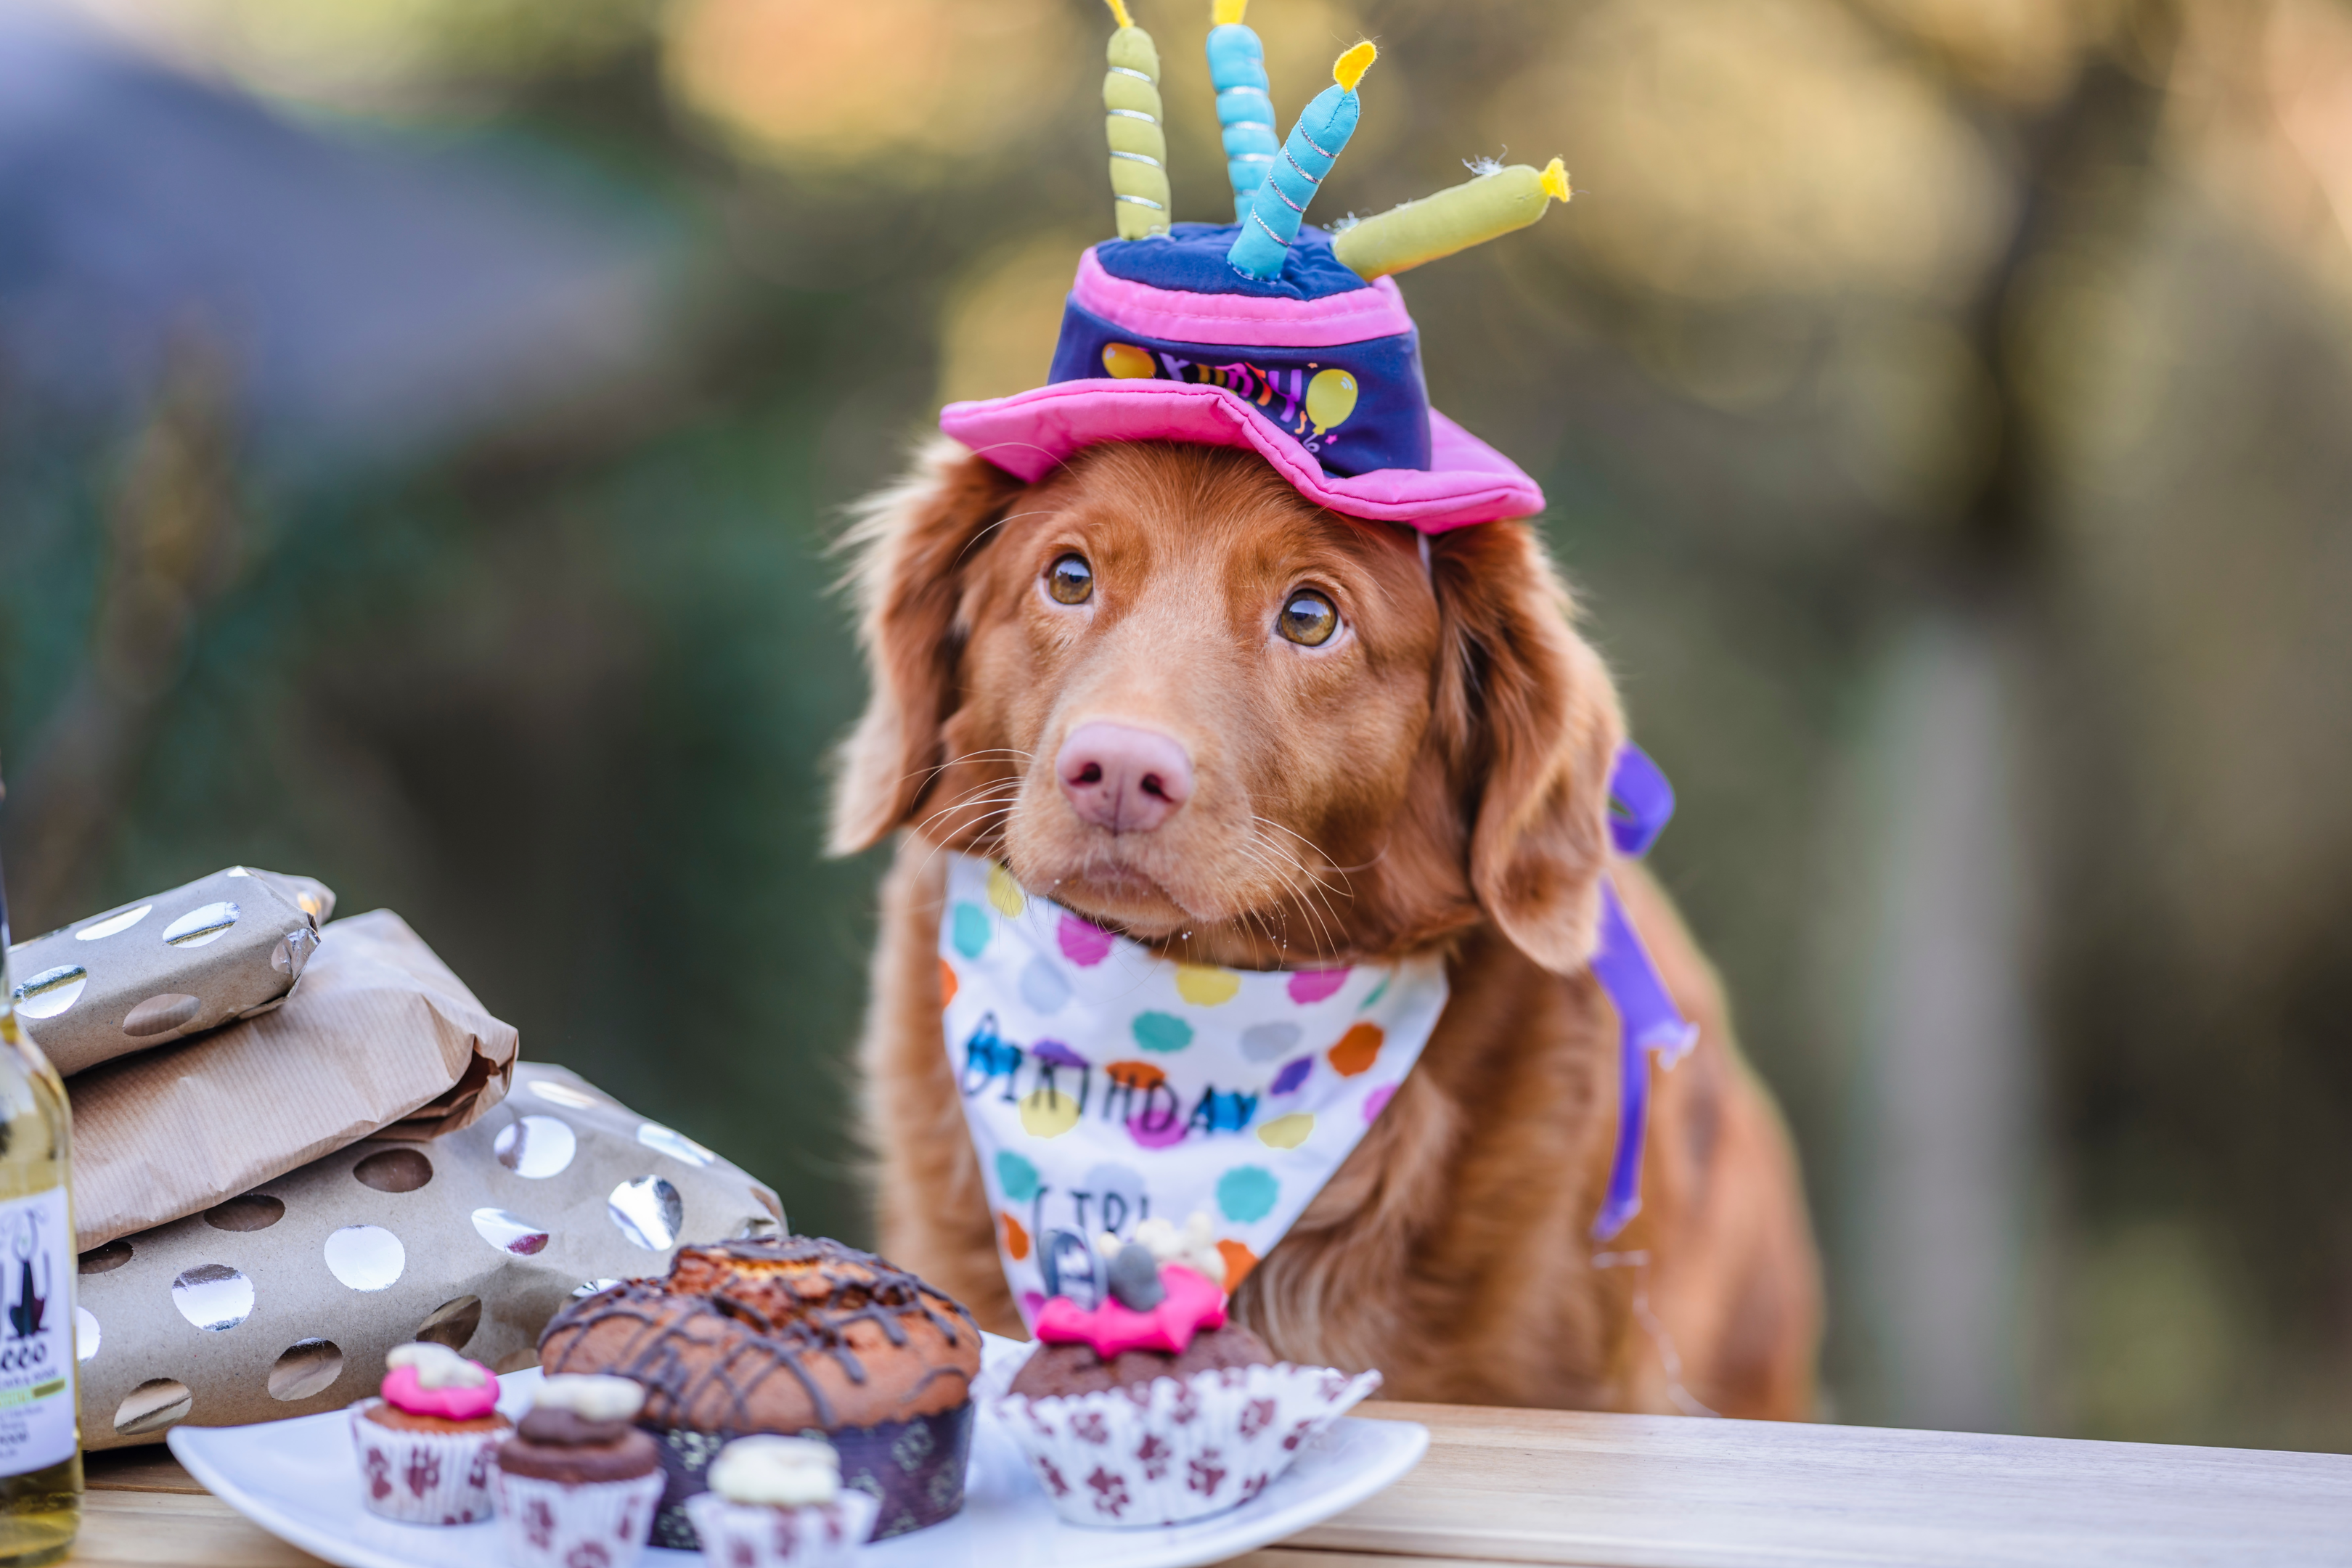 Paws for Celebration: Making Your Dog's Birthday Unforgettable